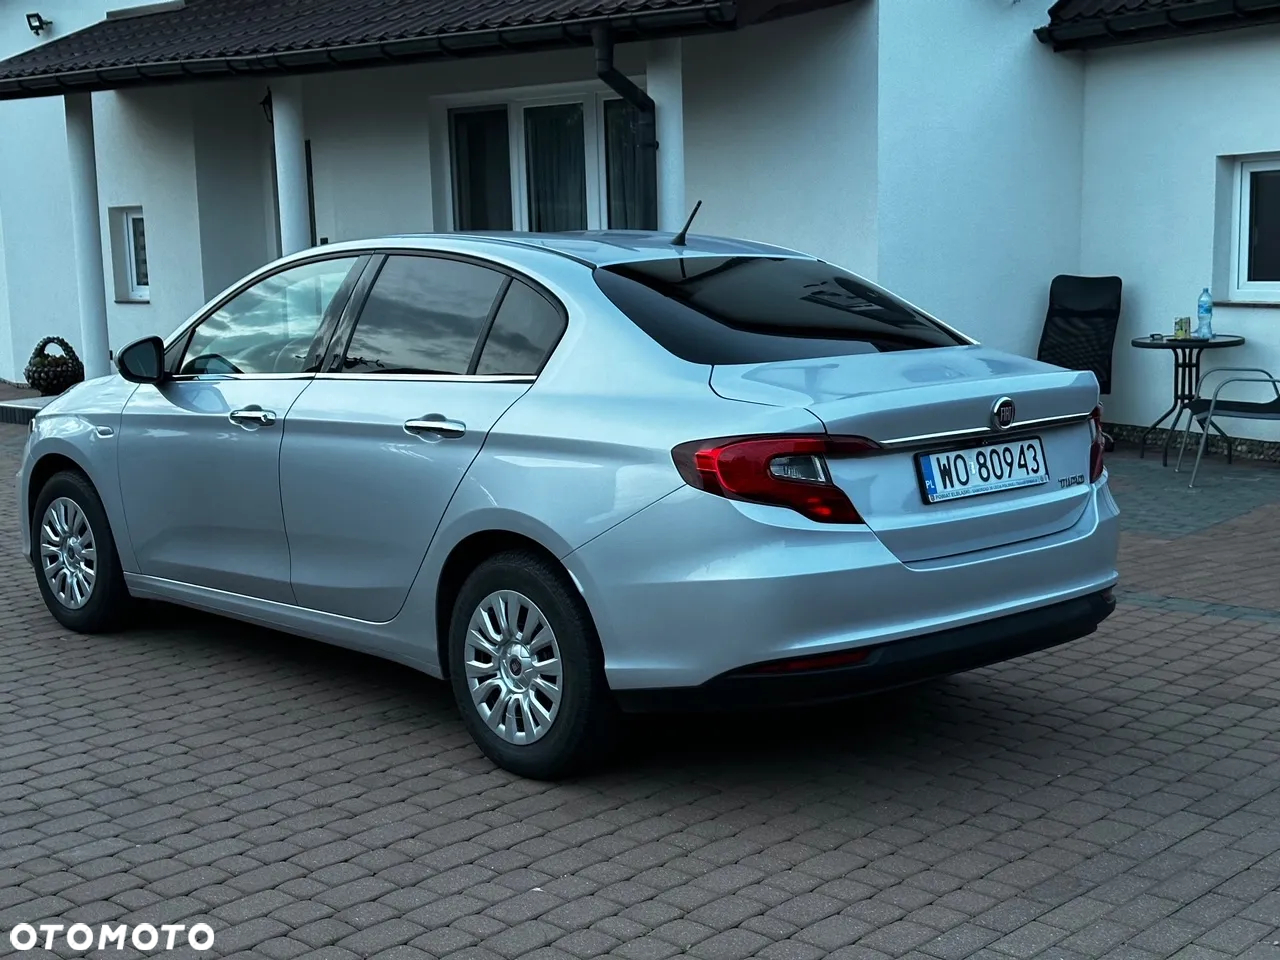 Fiat Tipo 1.4 16v Lounge - 4